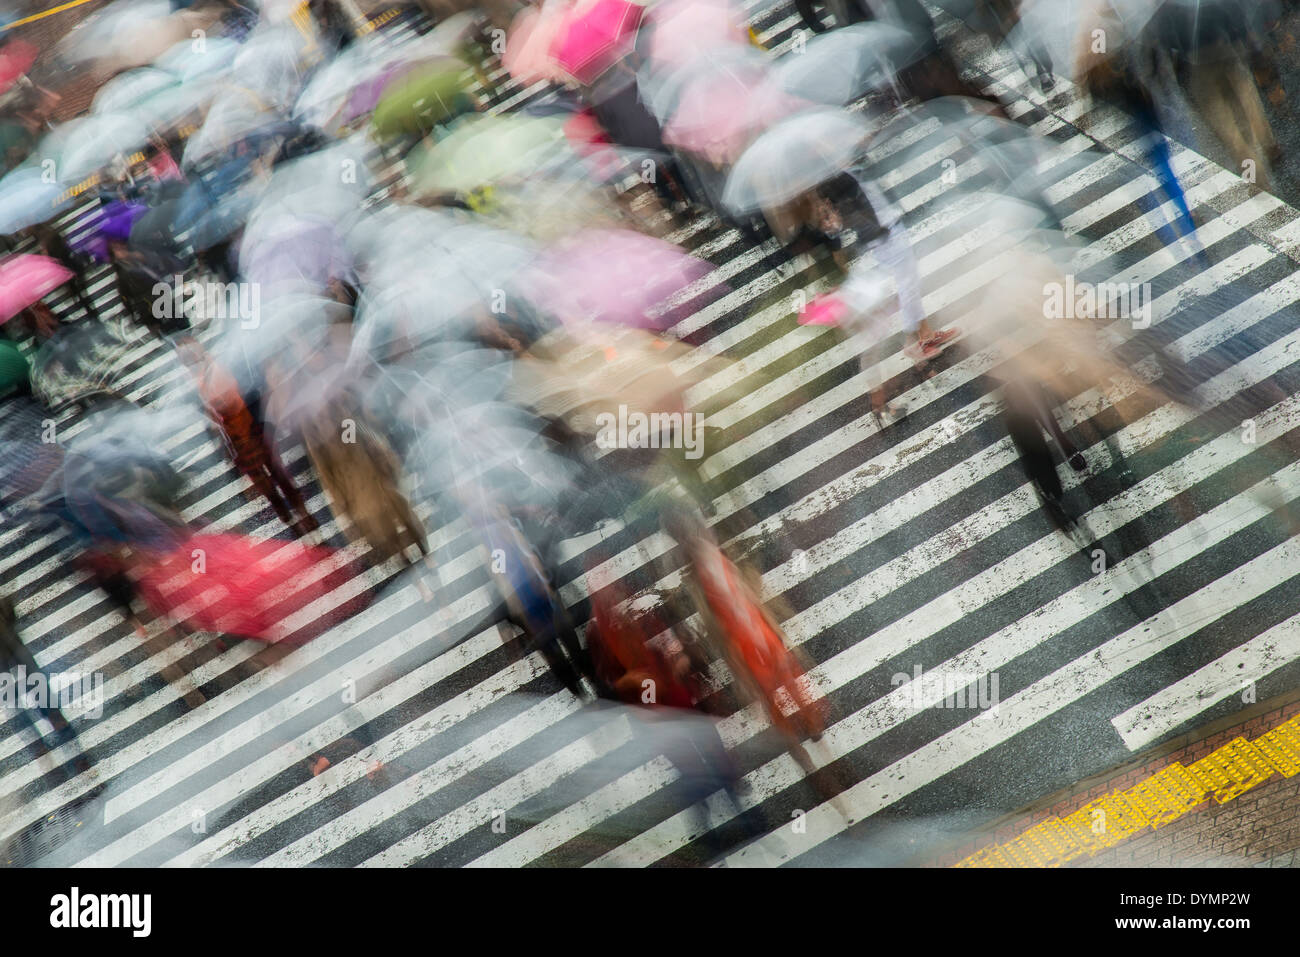 Blurred pedestrians with umbrellas crossing the street at Shibuya crossing, Tokyo, Japan Stock Photo